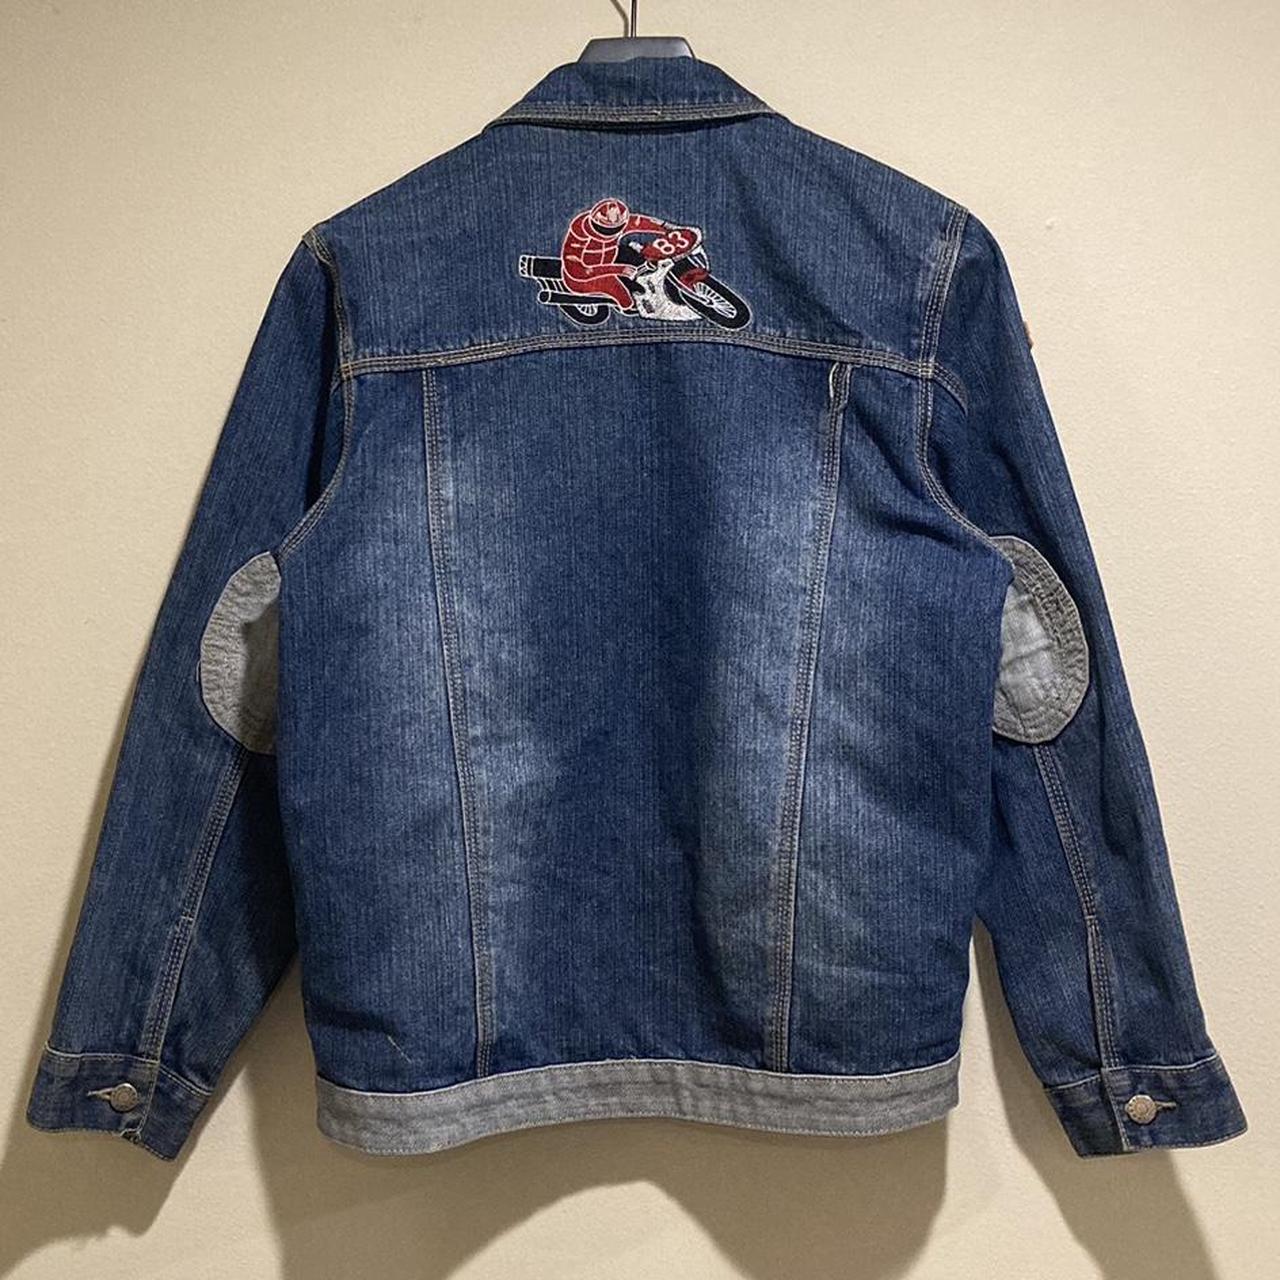 Vintage Jean Jacket Cool patches and embroidery No... - Depop